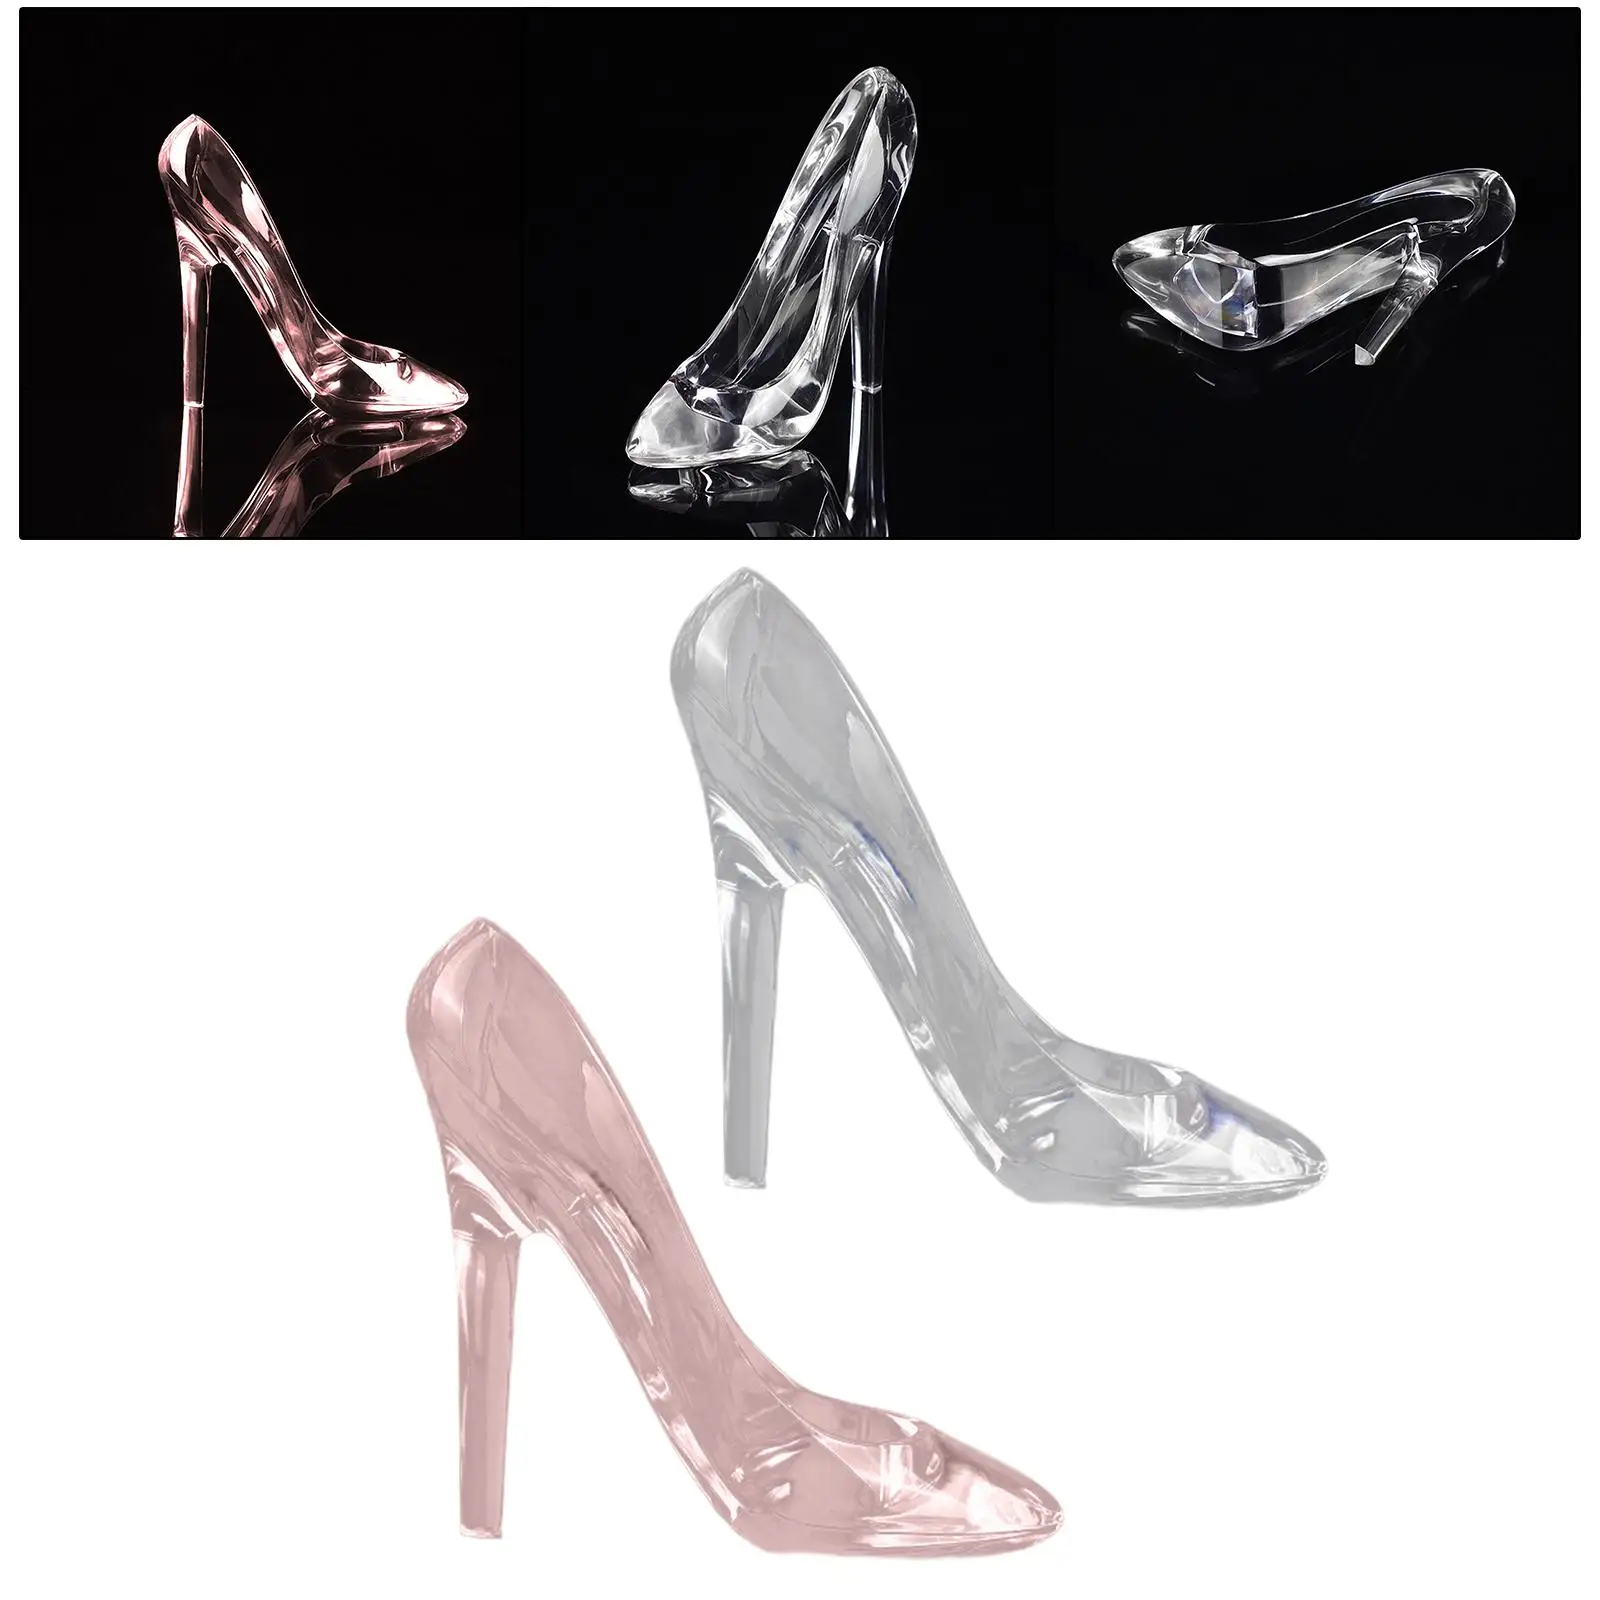 Acrylic Shoes Princess Shoes Candy Holders Decoration Slipper Figurine Home Decor Clear for Wedding Bride Party Halloween Kids